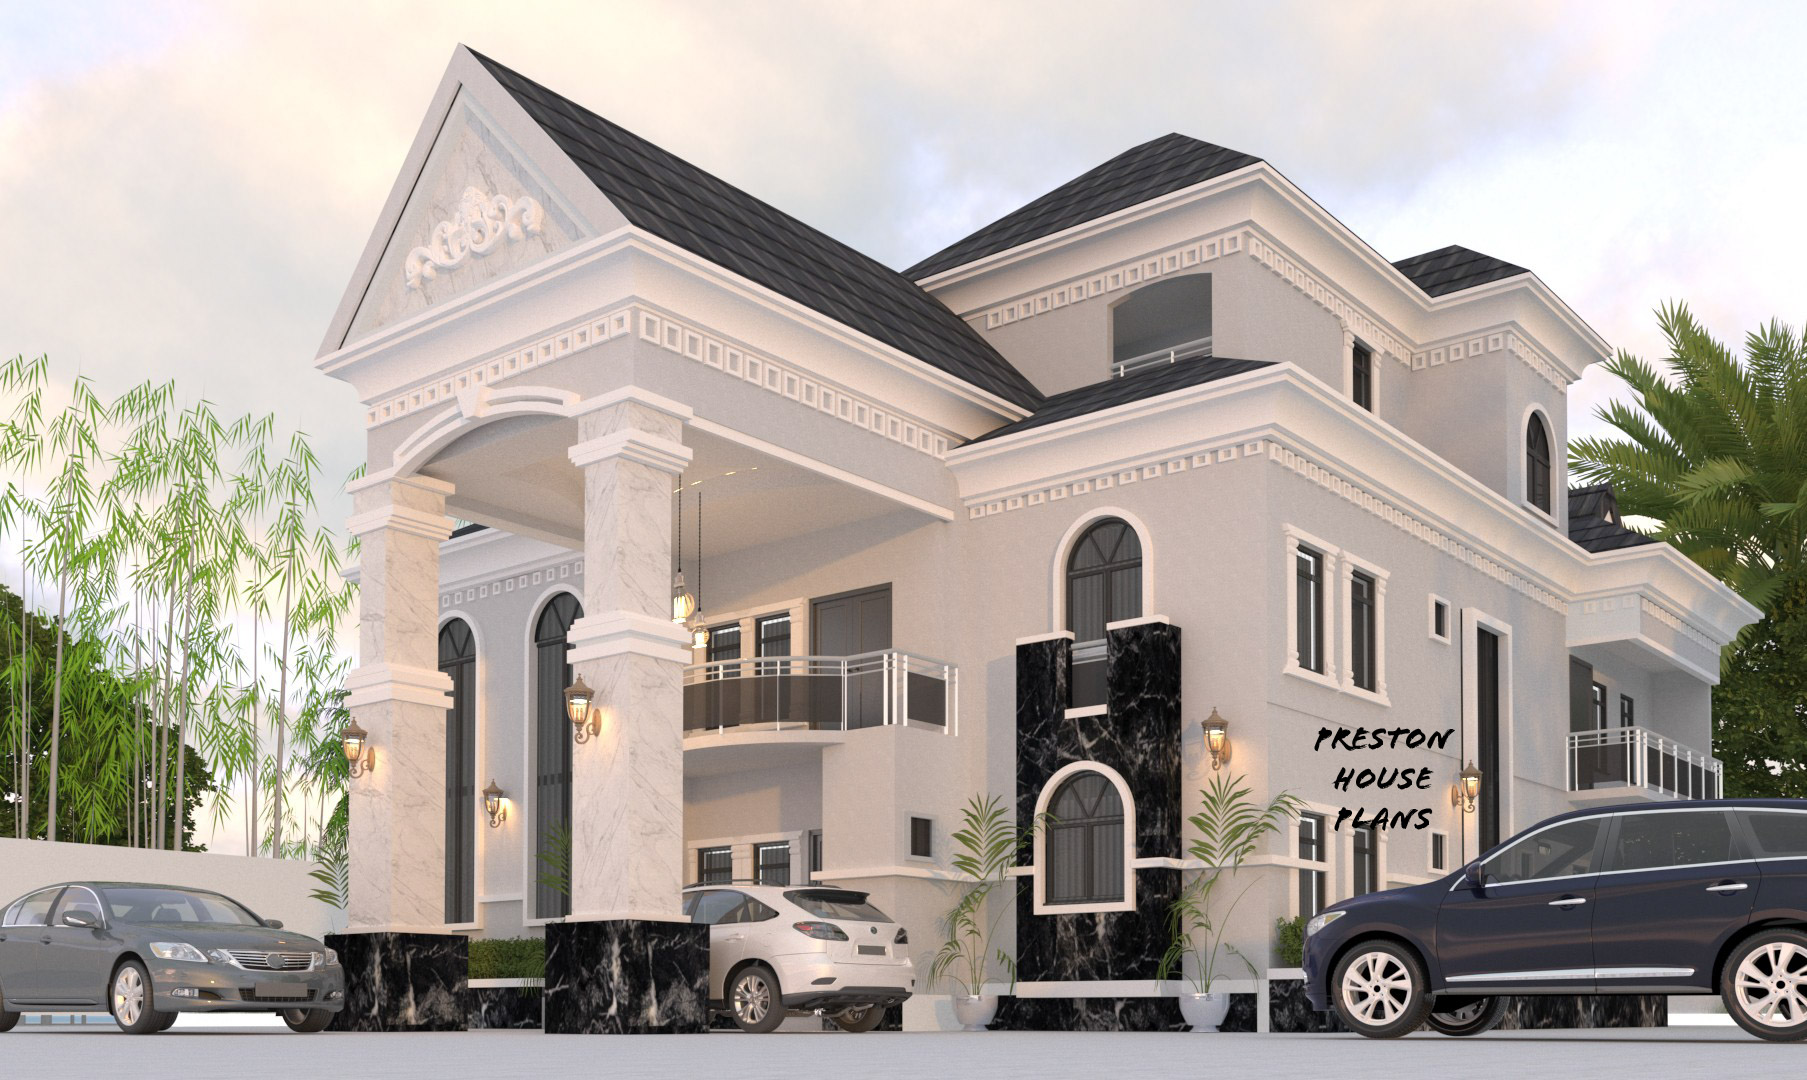 7 bedroom Duplex with a Penthouse